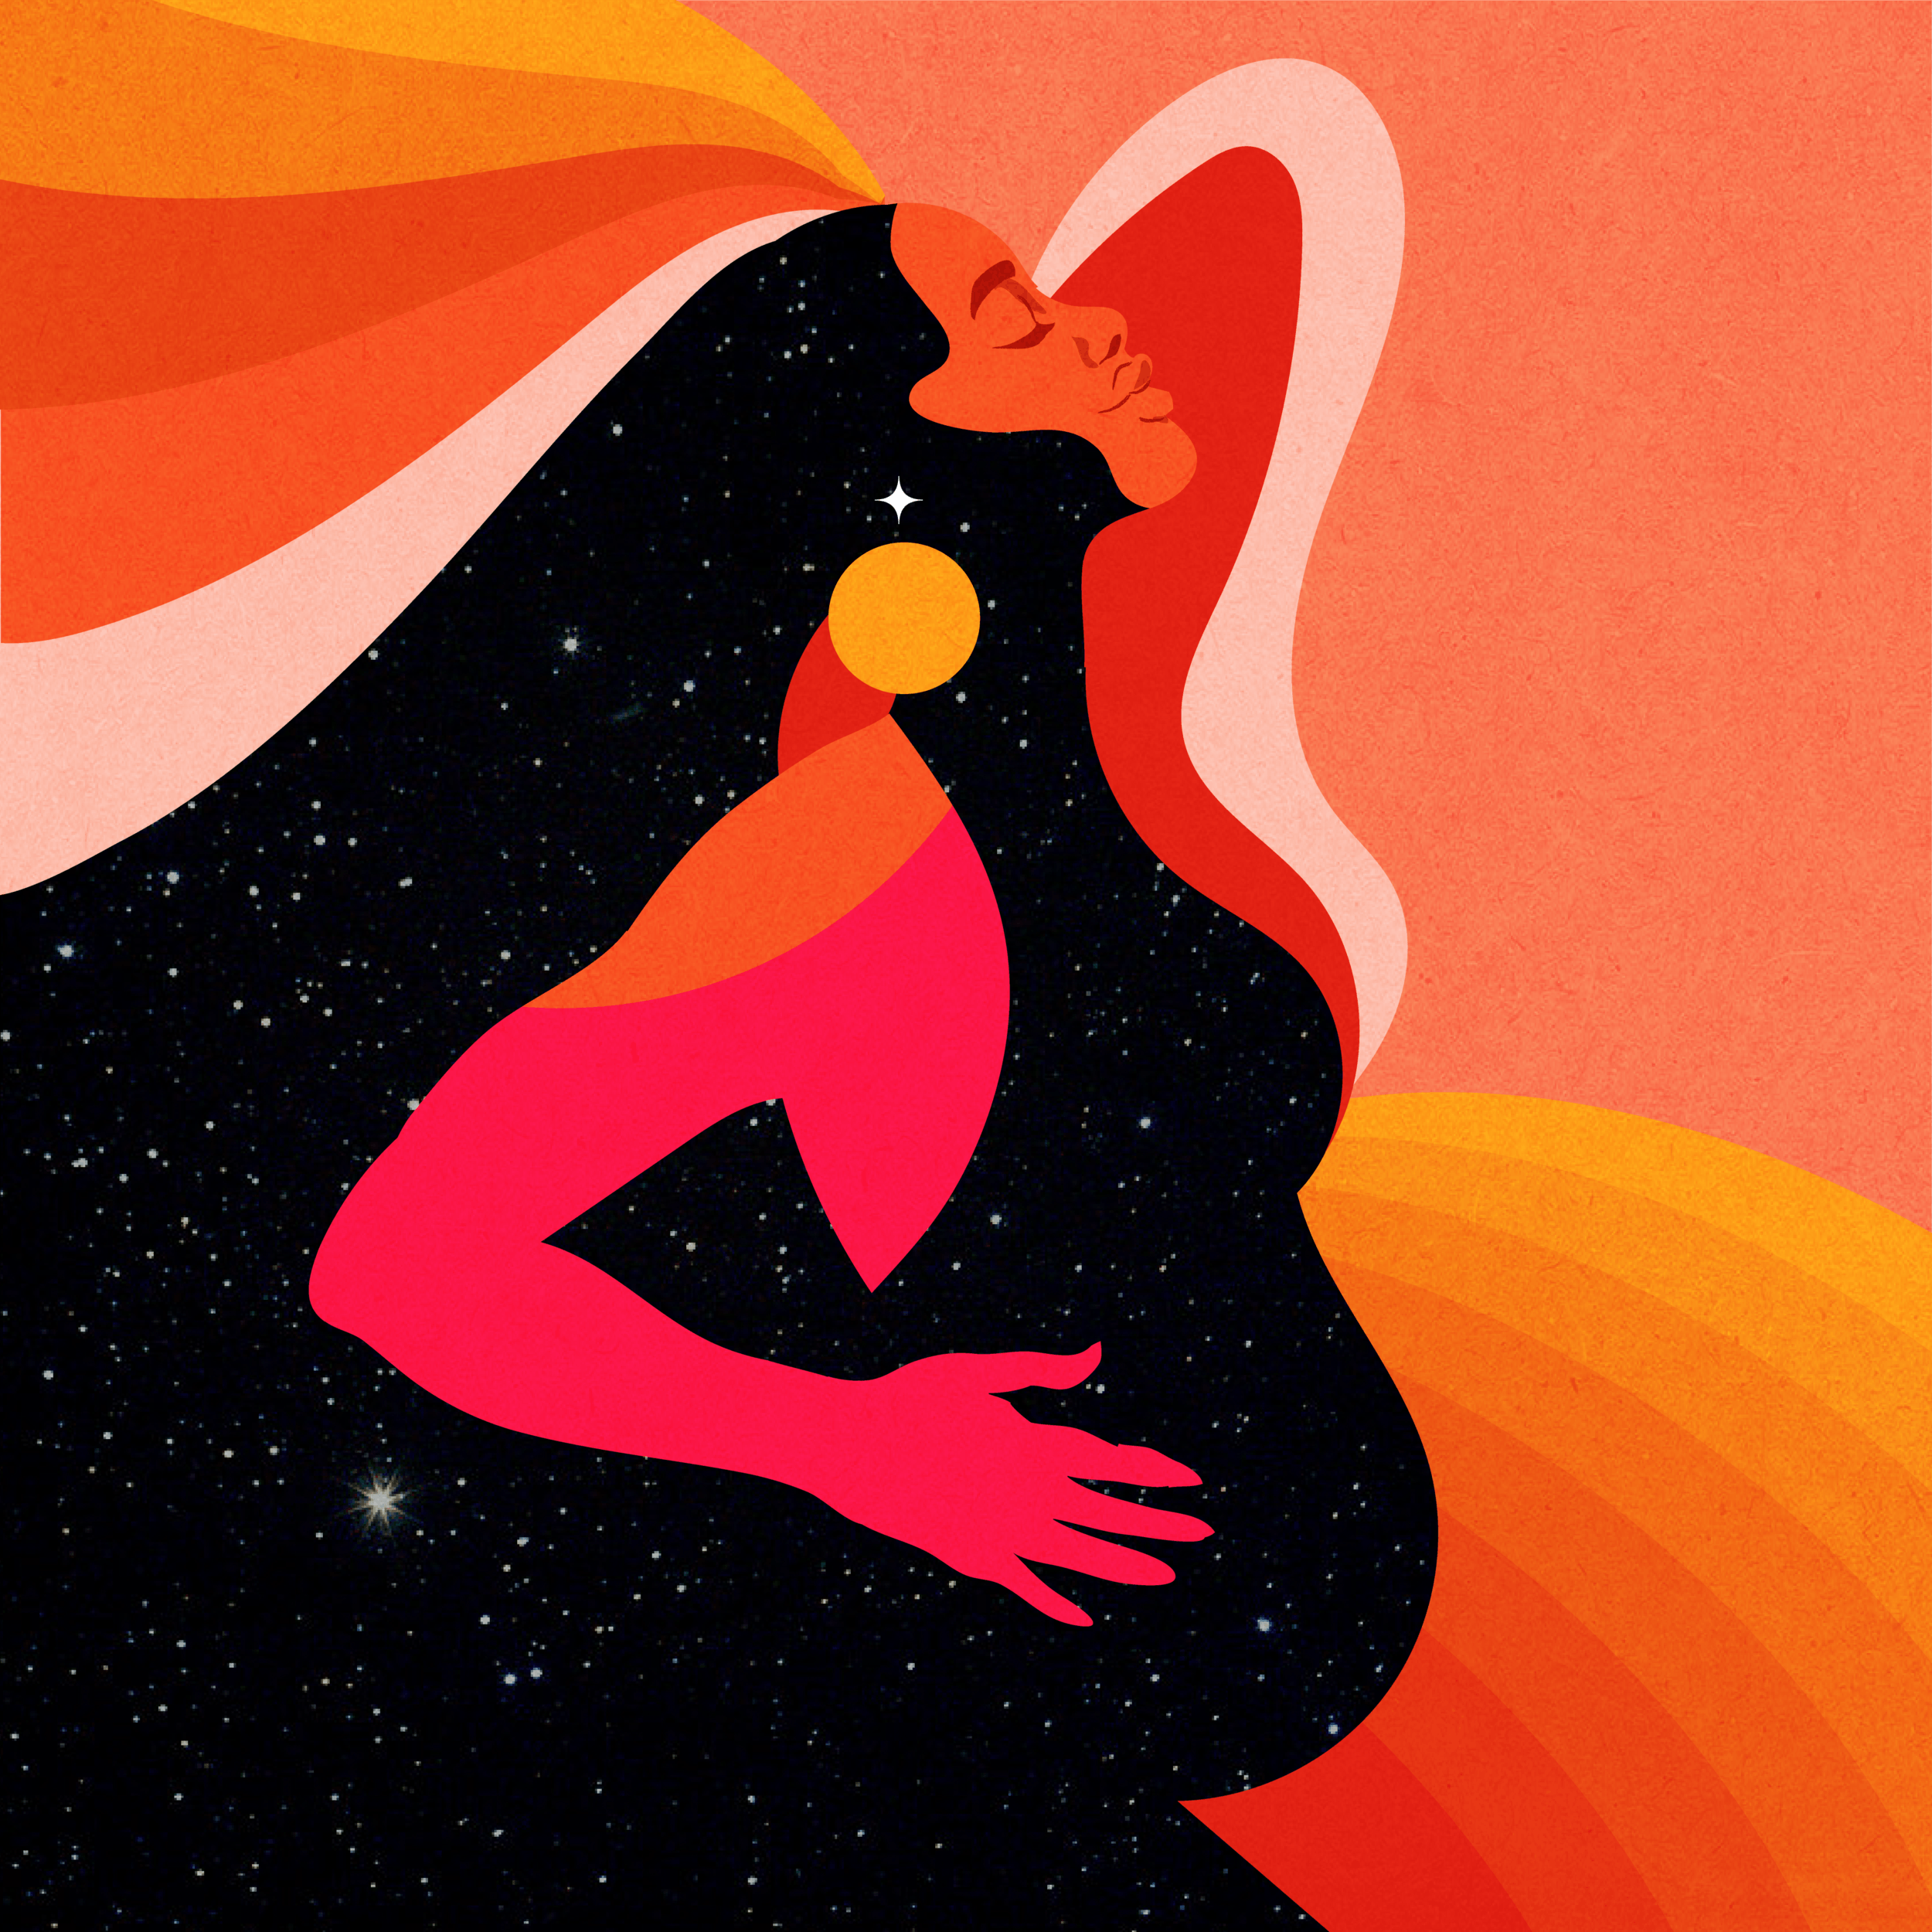 An illustration of a pregnant woman standing in front of an orange background